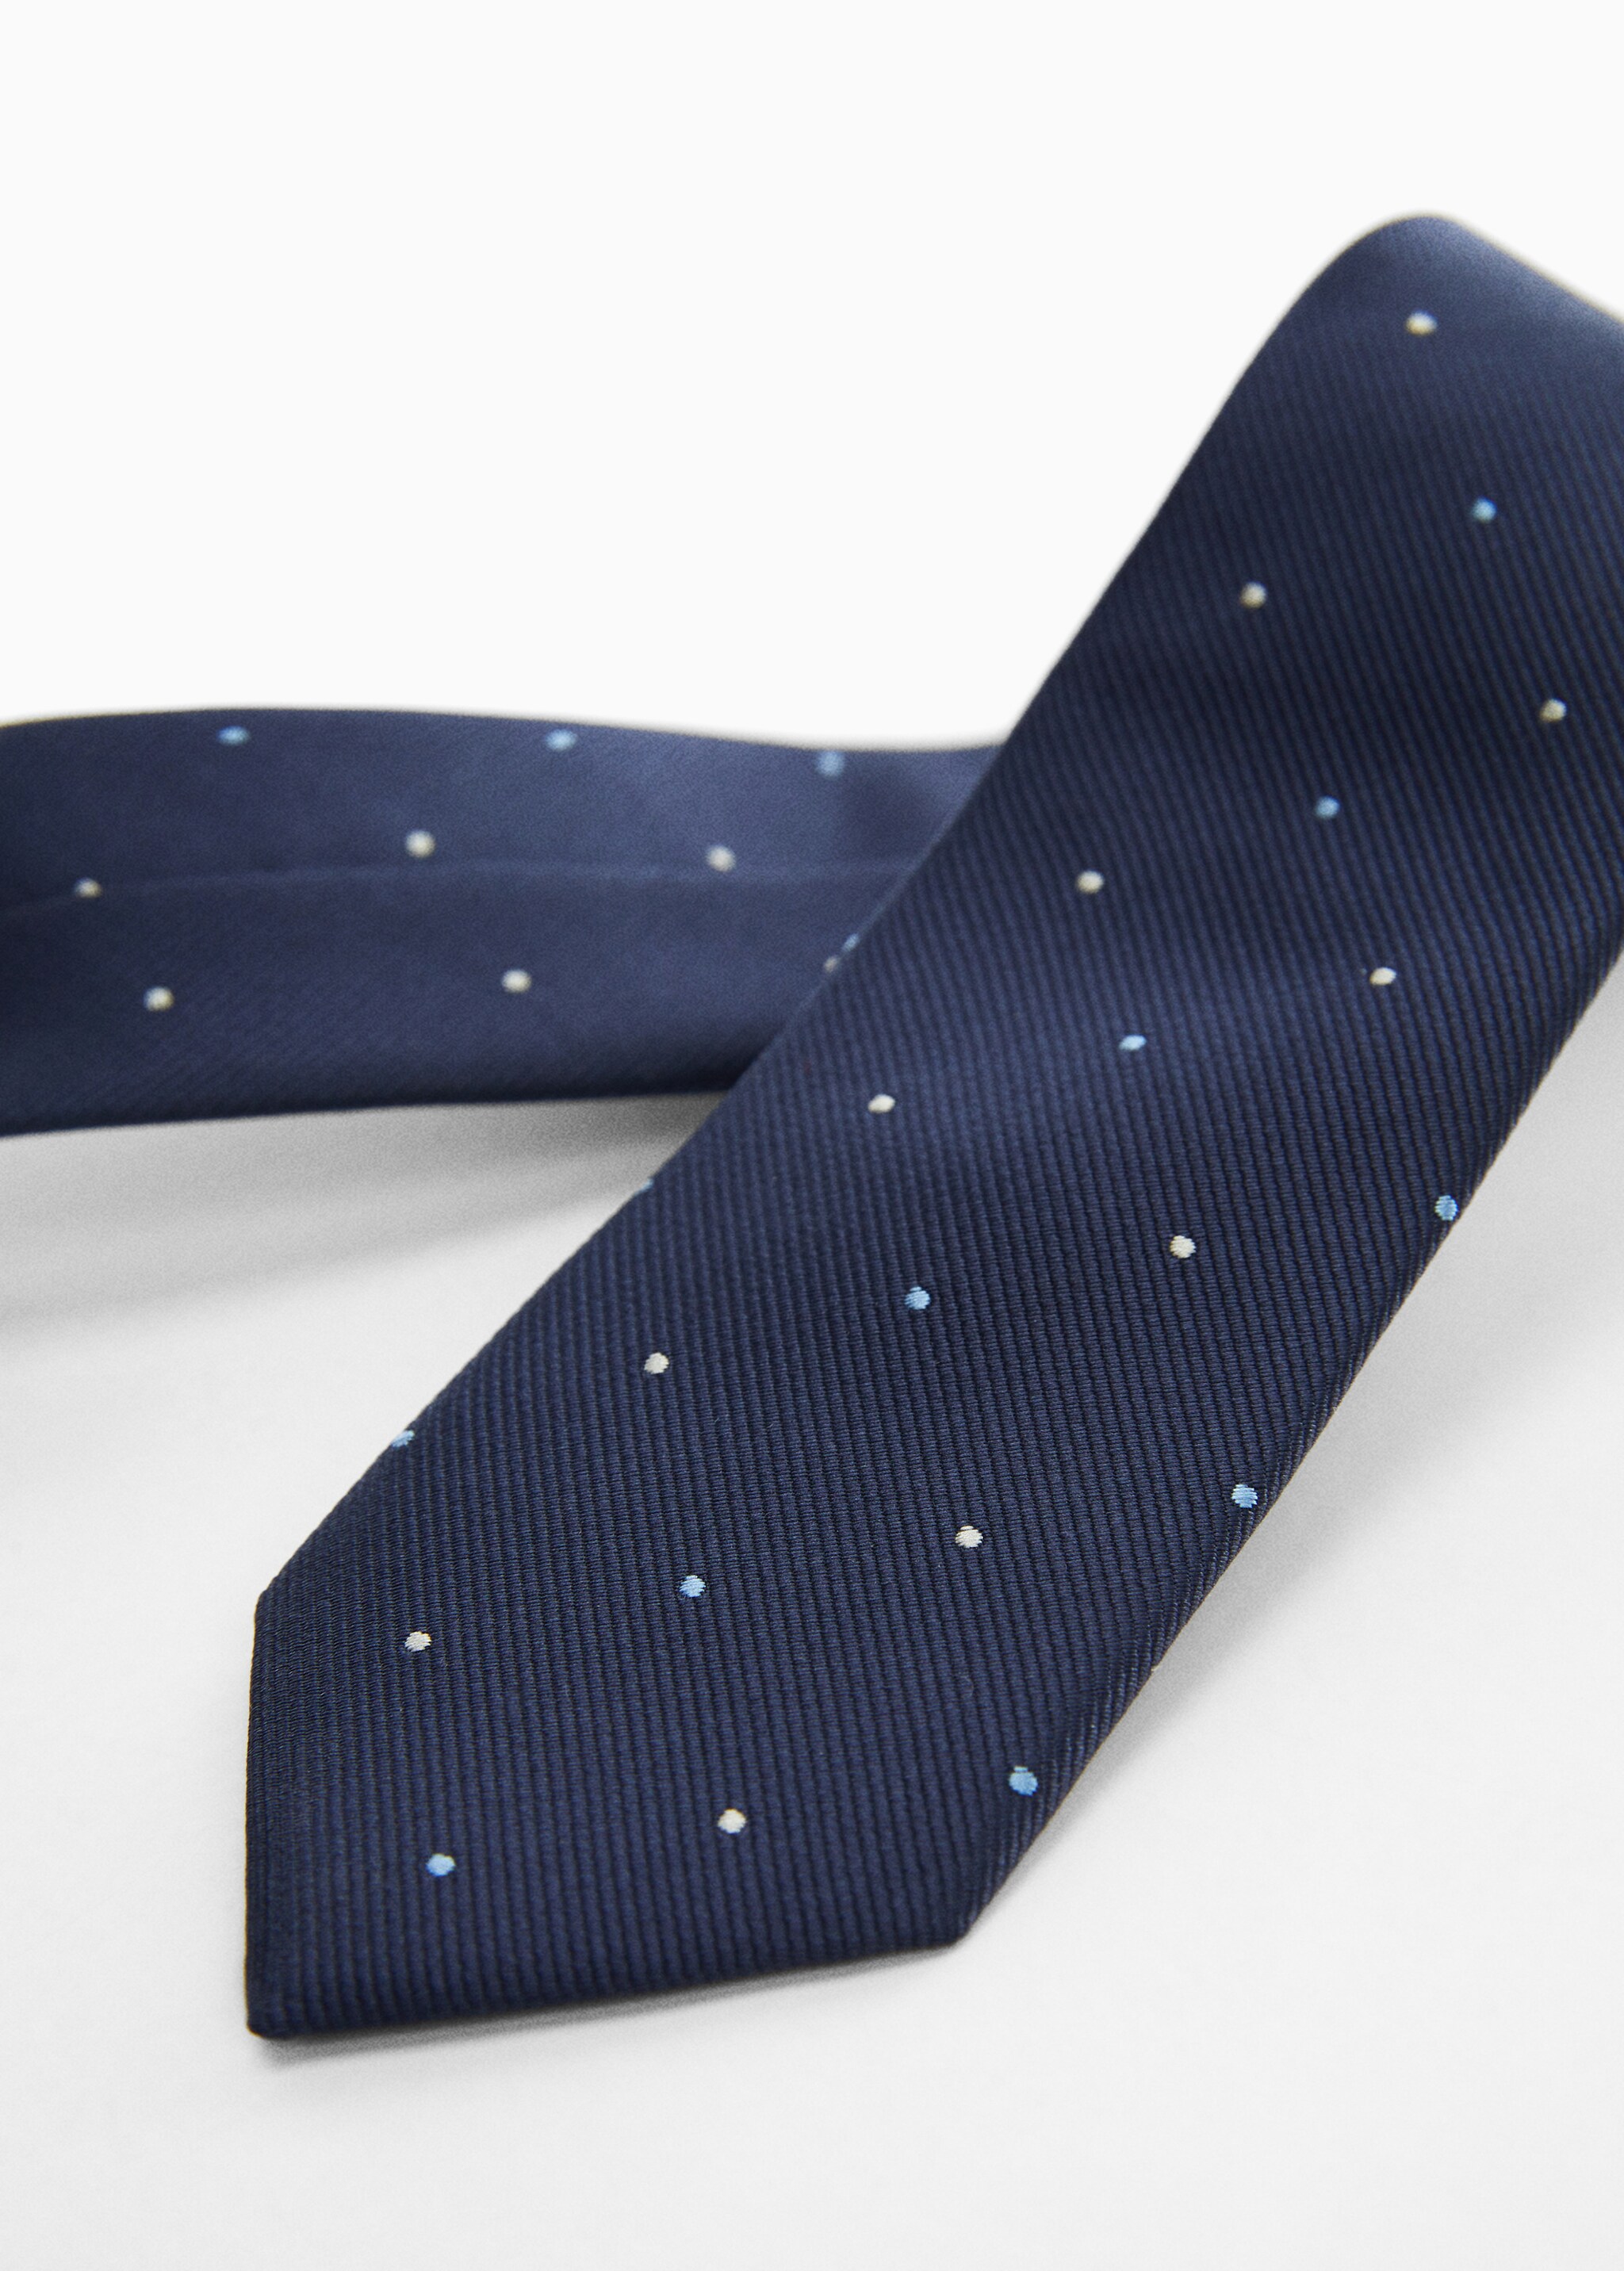 Polka-dot patterned tie - Details of the article 1